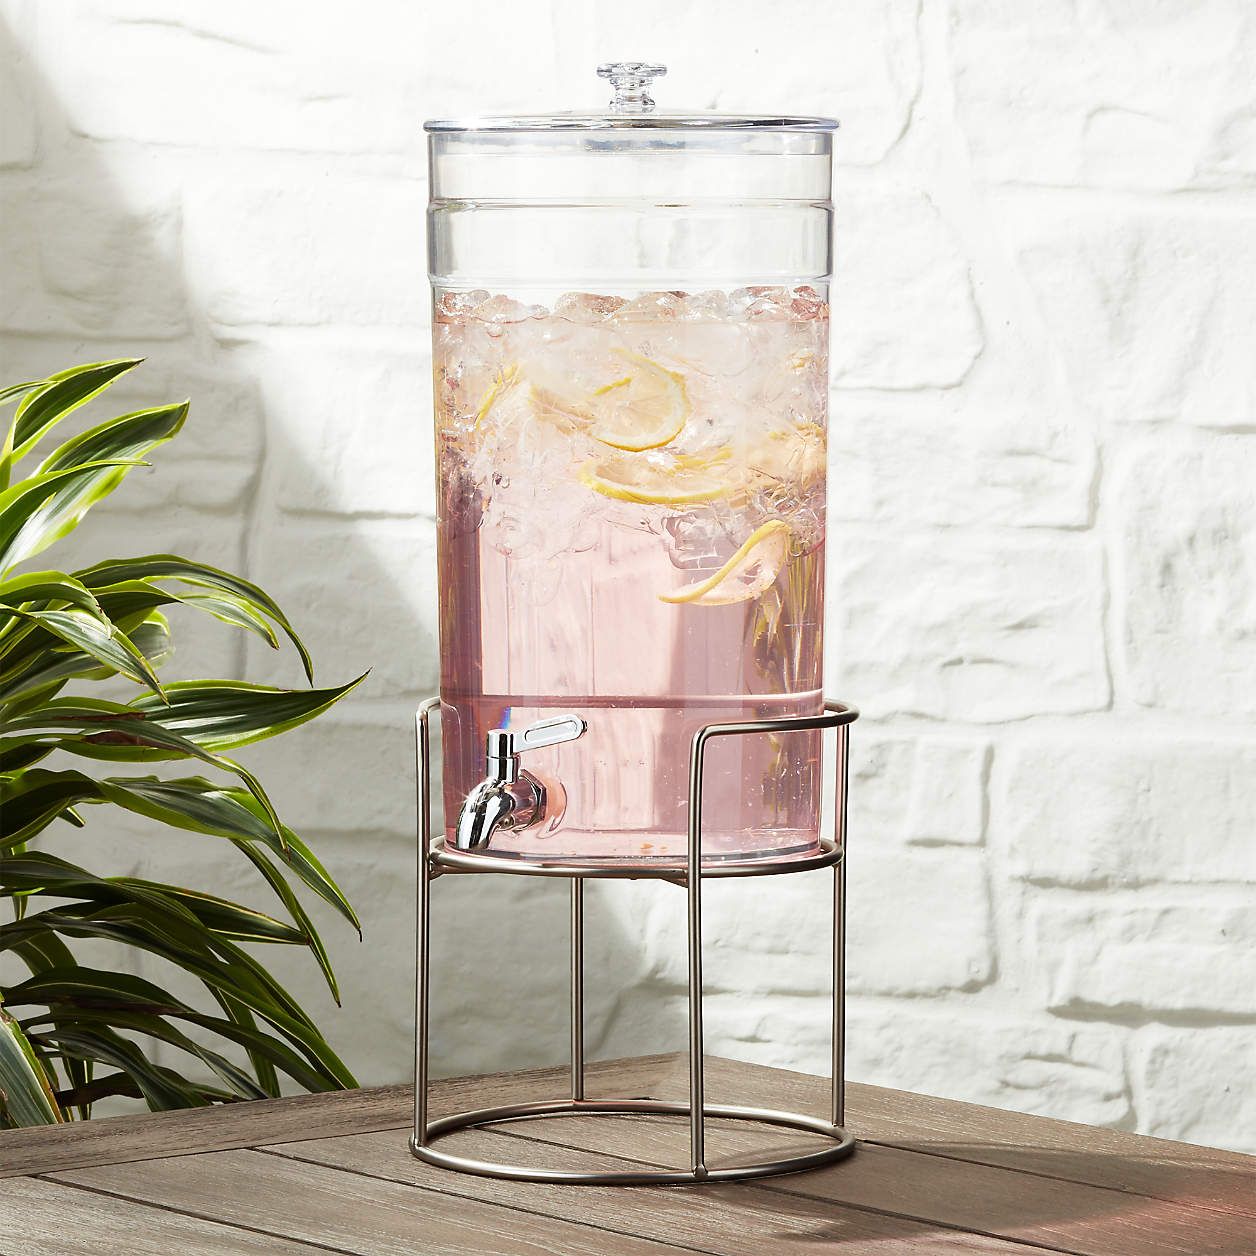 Claro Acrylic Drink Dispenser with Brooks Grey Wood Stand + Reviews | Crate and Barrel | Crate & Barrel